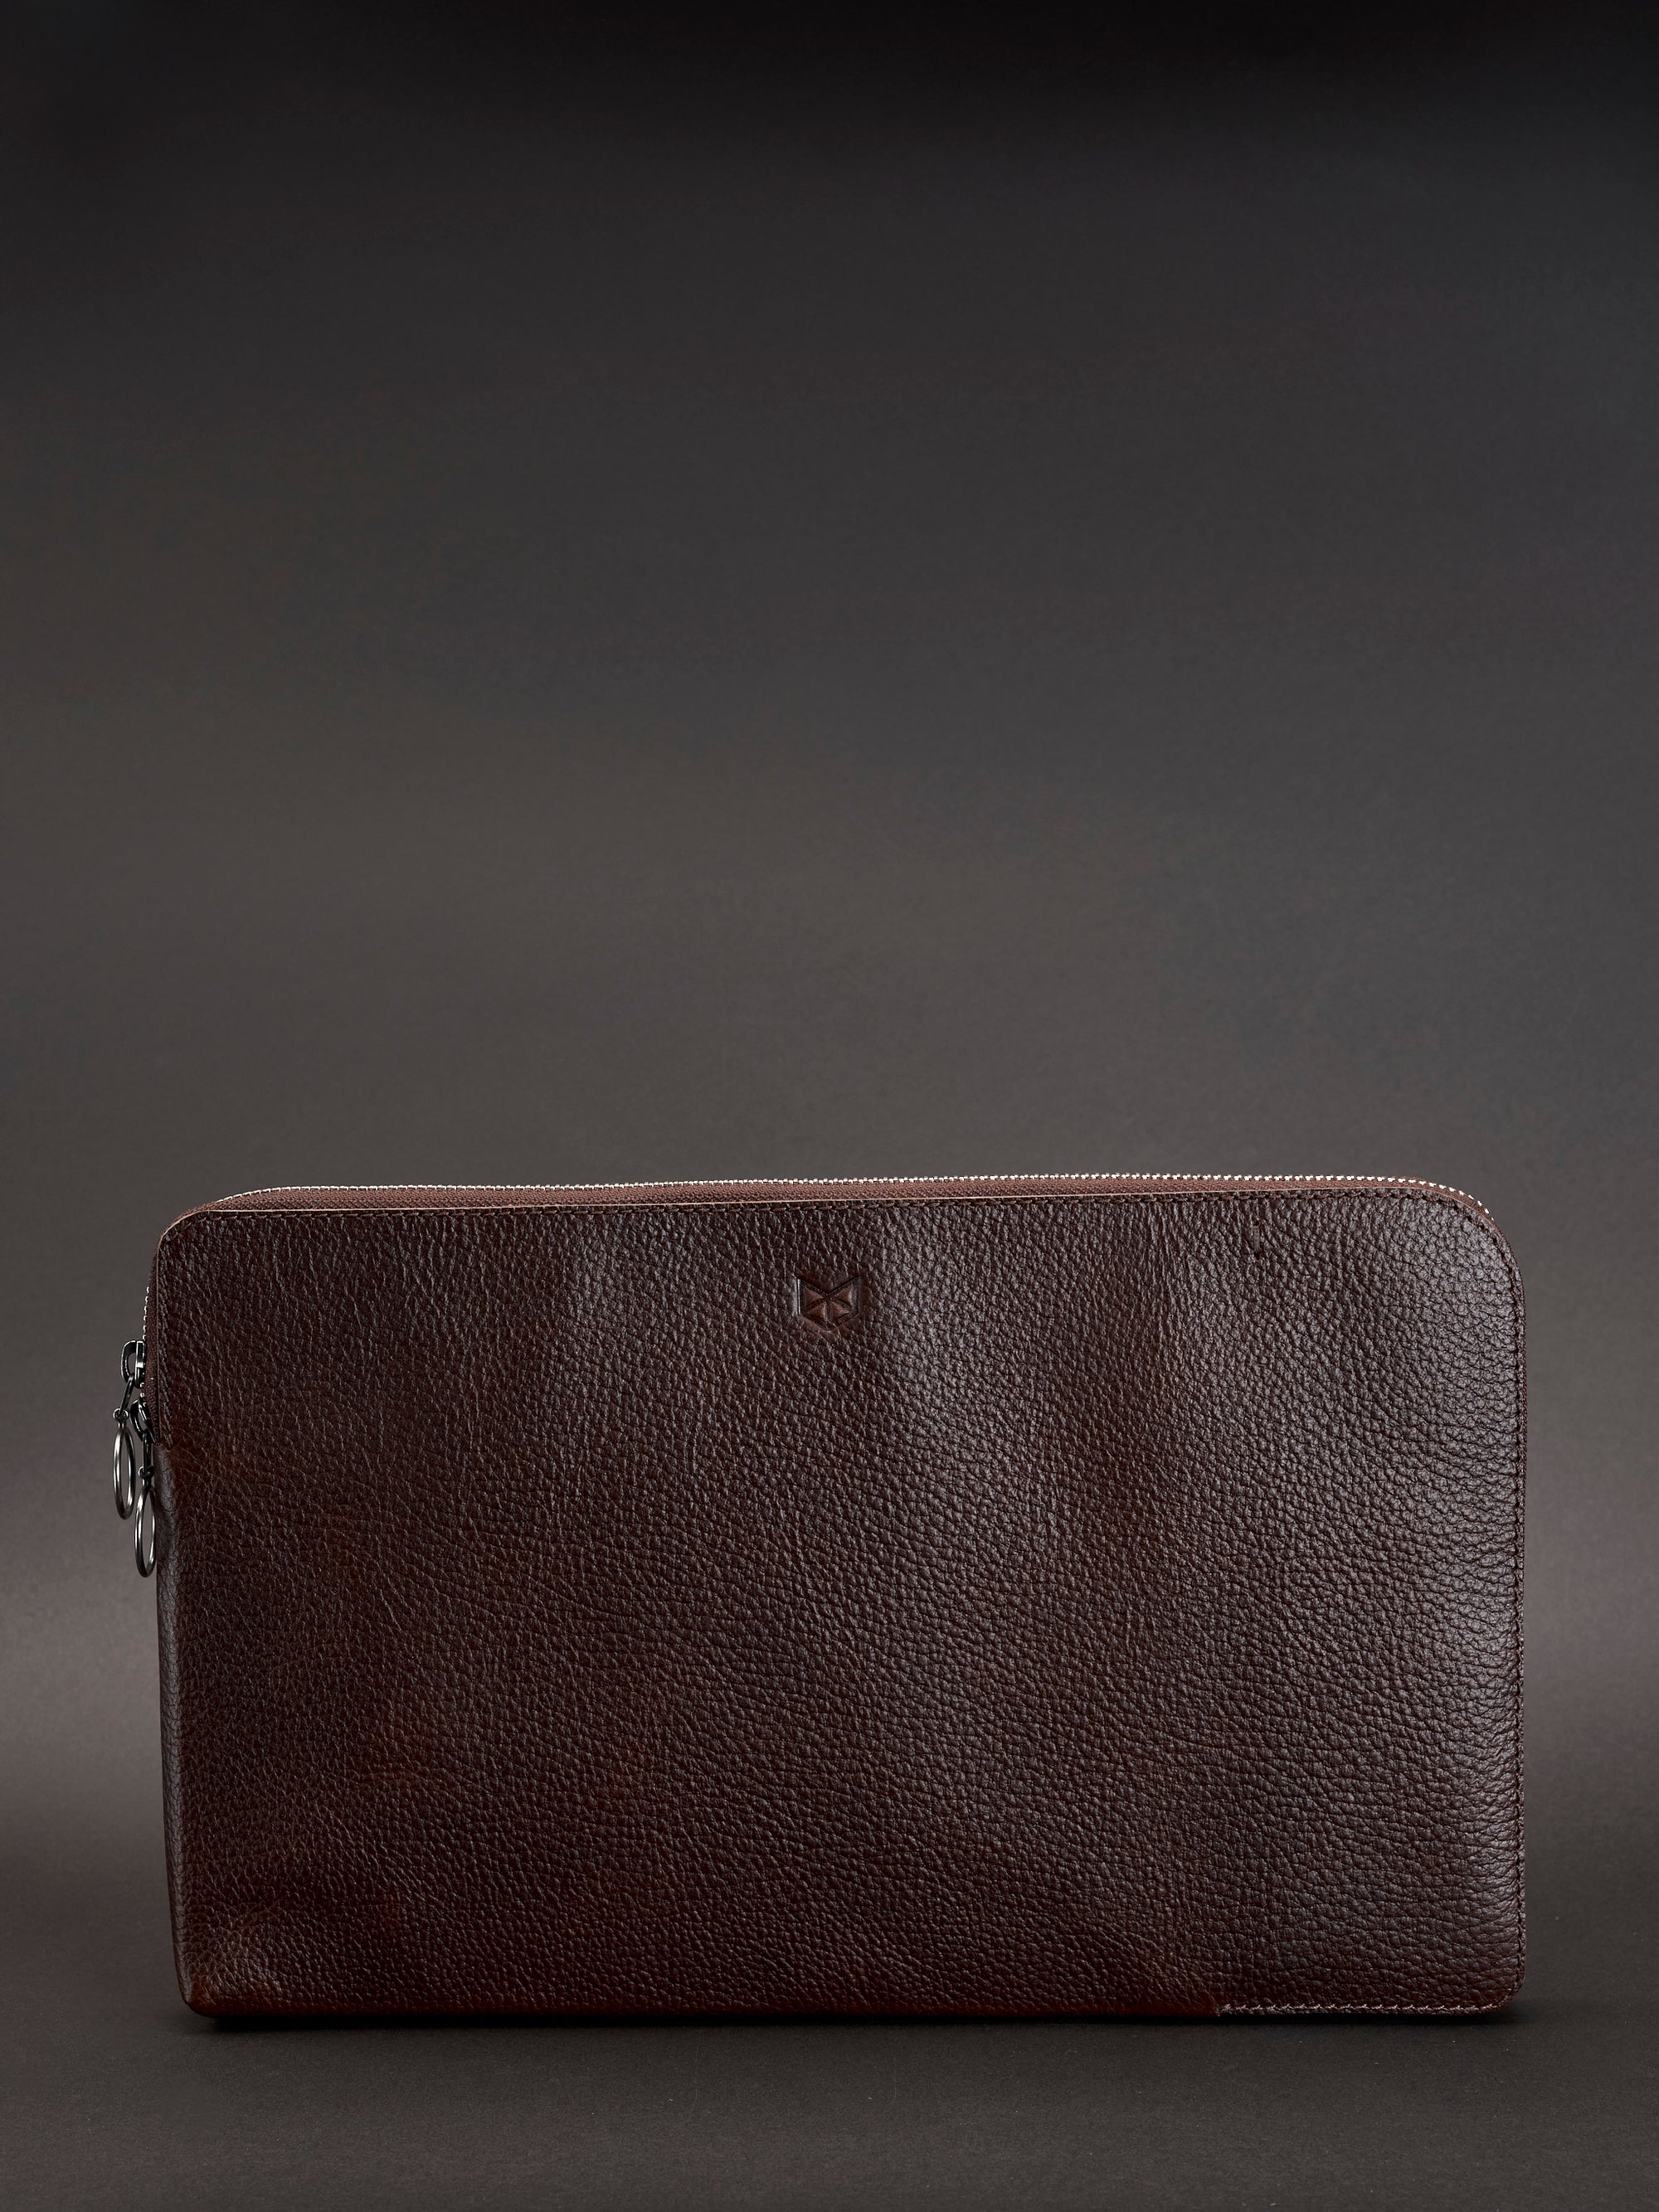 Front view. Draftsman 6 iPad Case Dark Brown, iPad Pro 11-inch, iPad Pro 12.9-inch, M1 Chip by Capra Leather